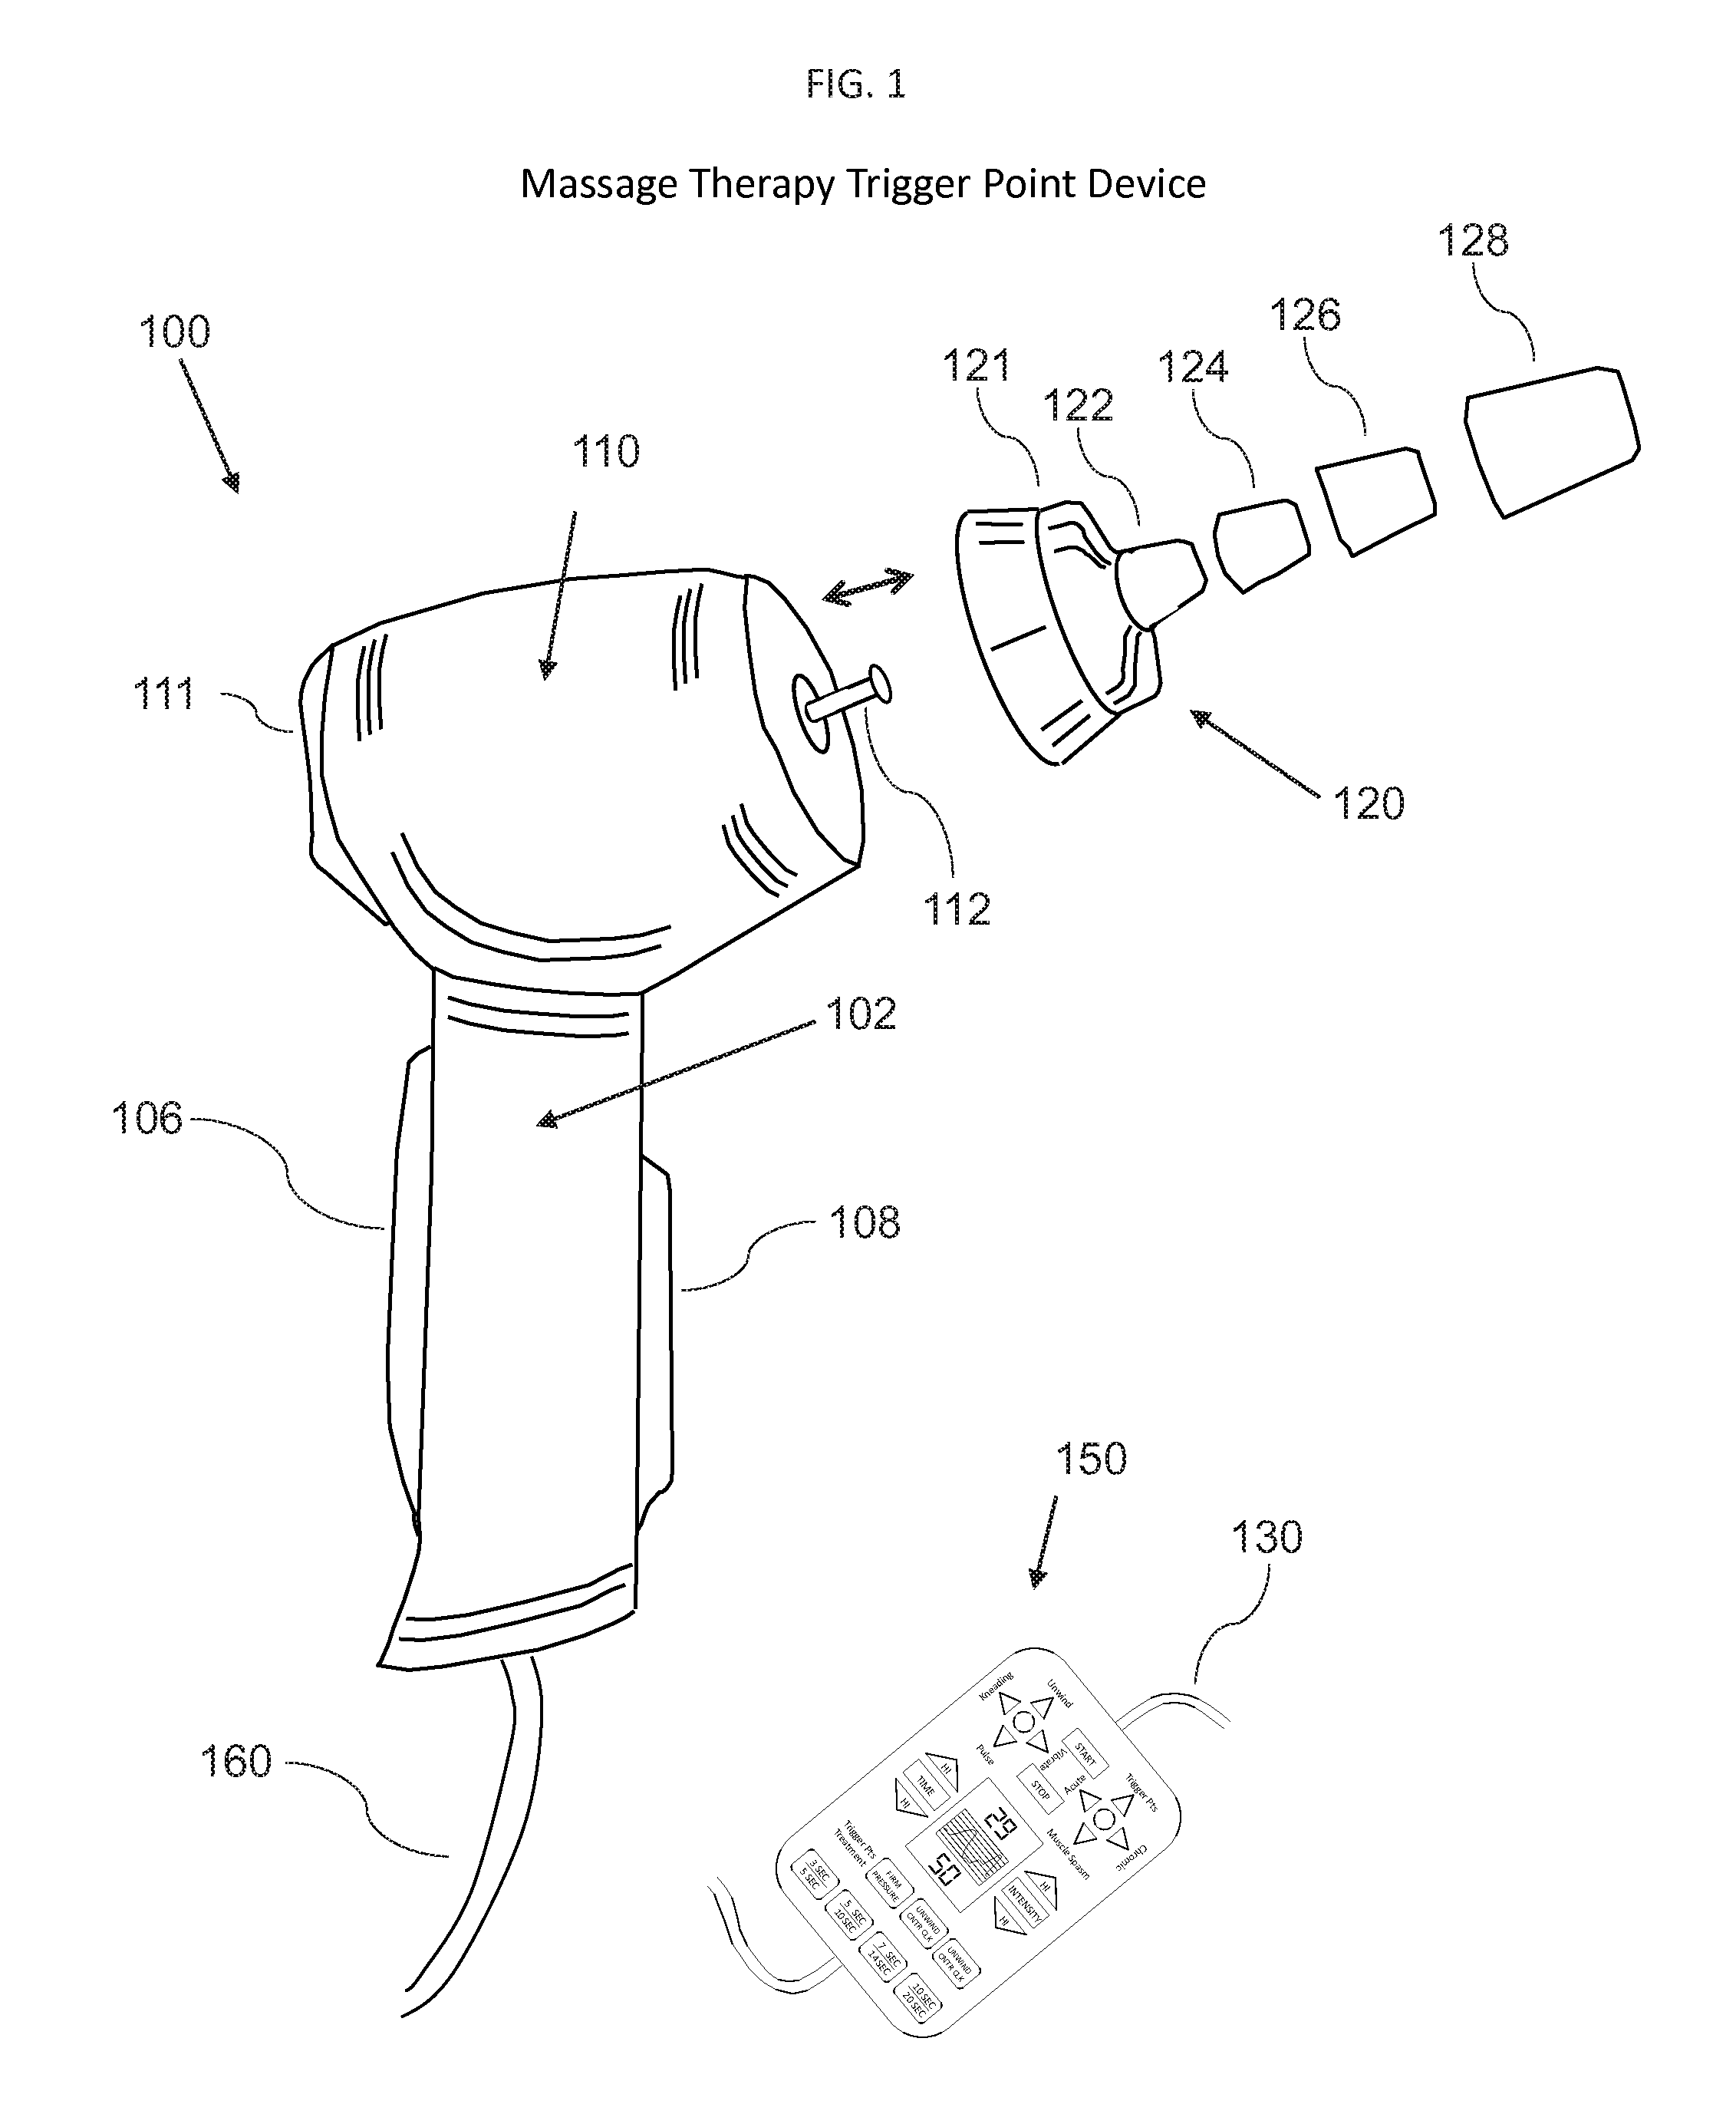 Device and method for trigger point massage therapy